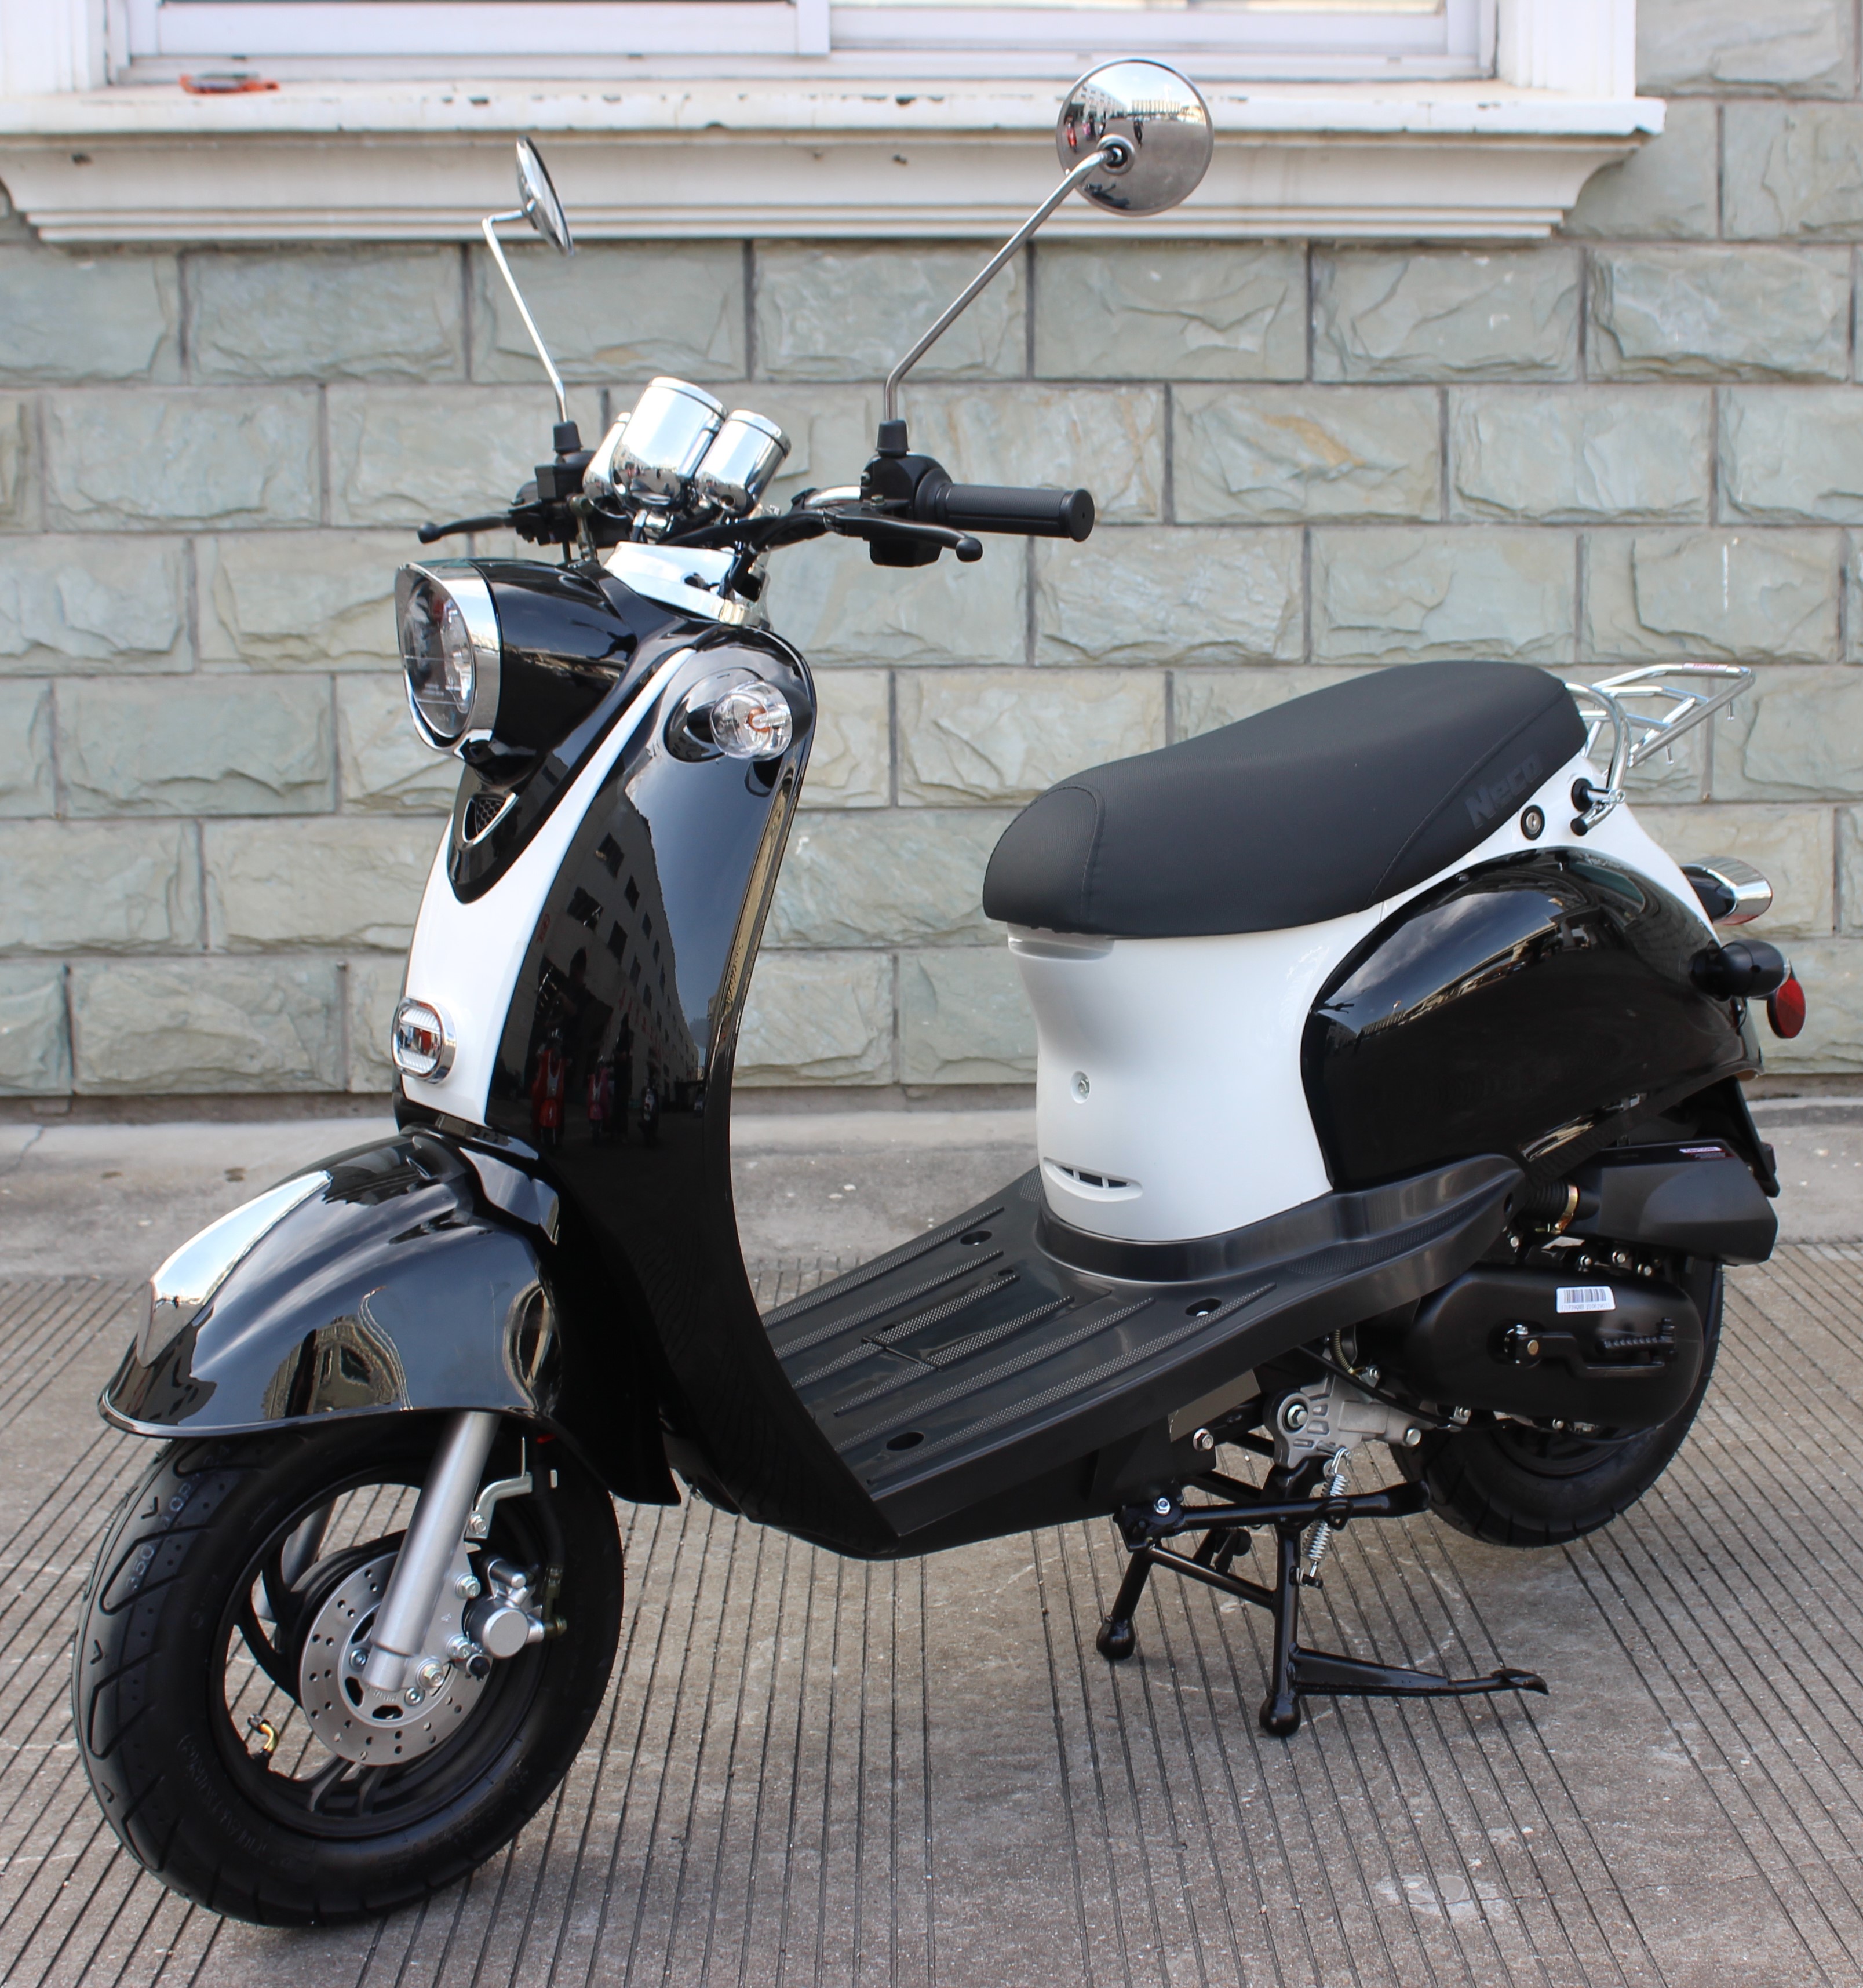 scooer 50cc neuf, scooter 50cc pas cher, scooter 50cc discount, scooter 50cc  moins cher, scooter vespa, scooter dolce vita - LANRONG INTERNATIONAL